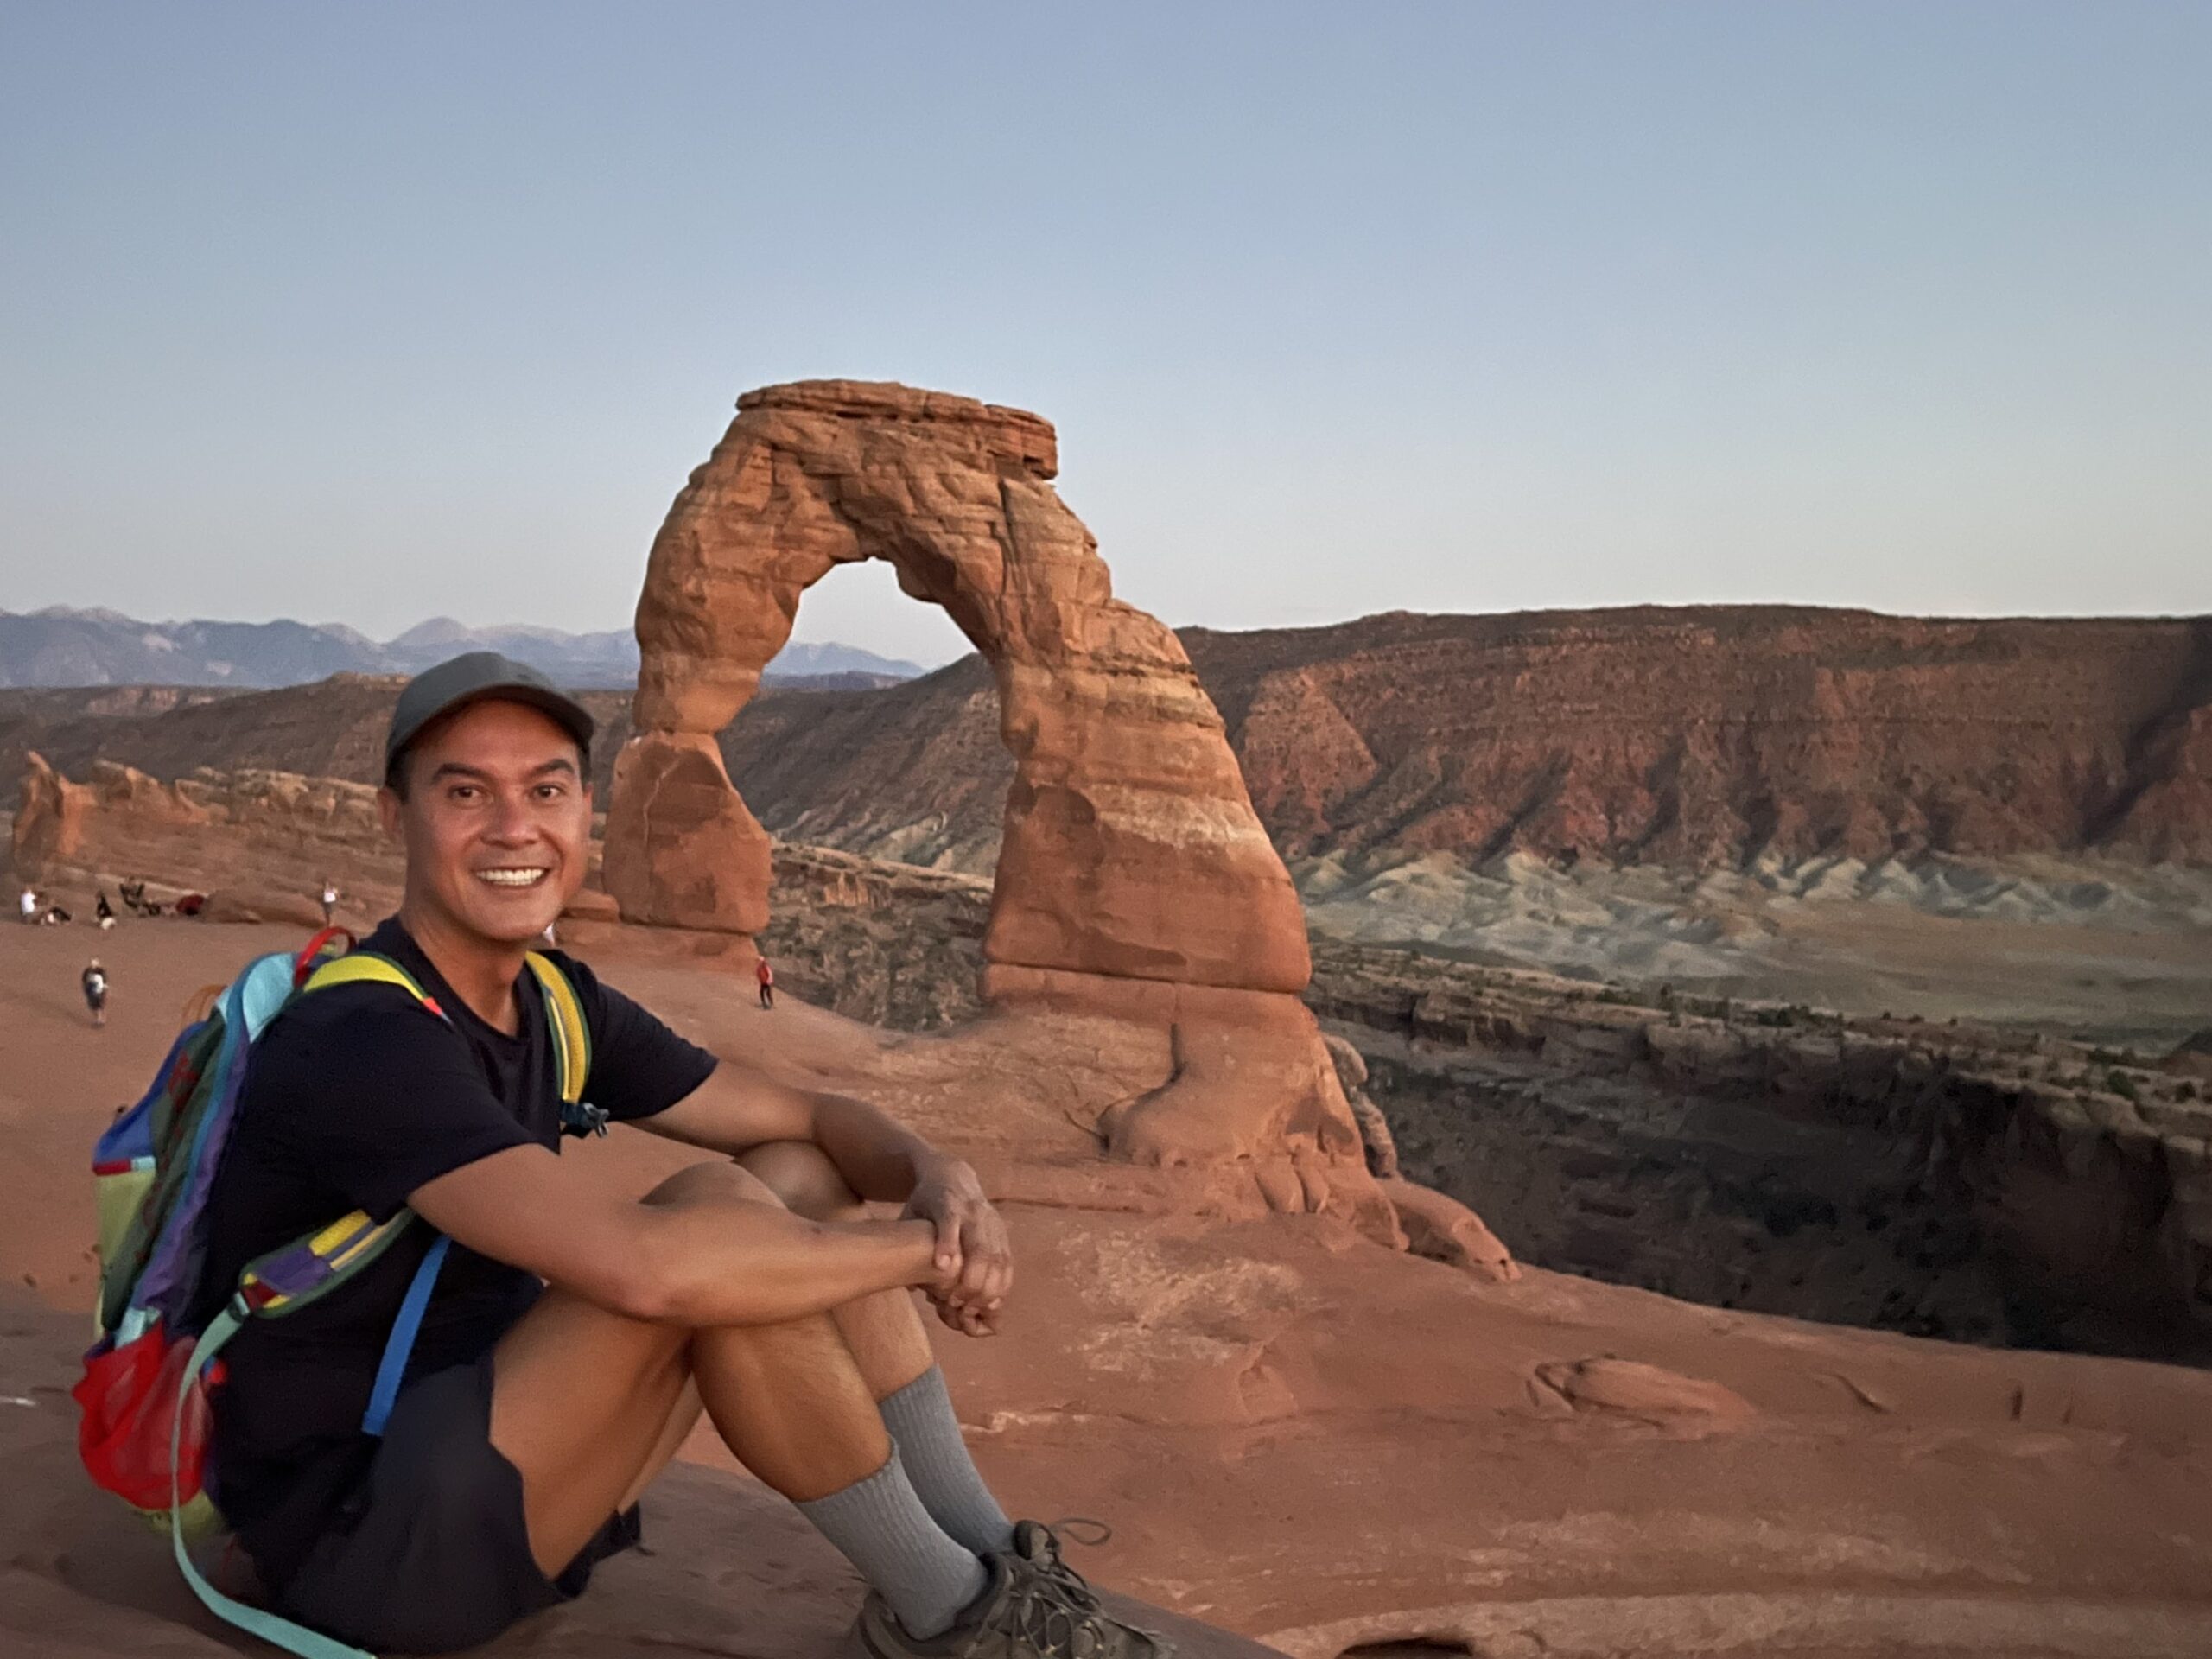 Paul posing in front of Delicate Arch in Arches National Park.